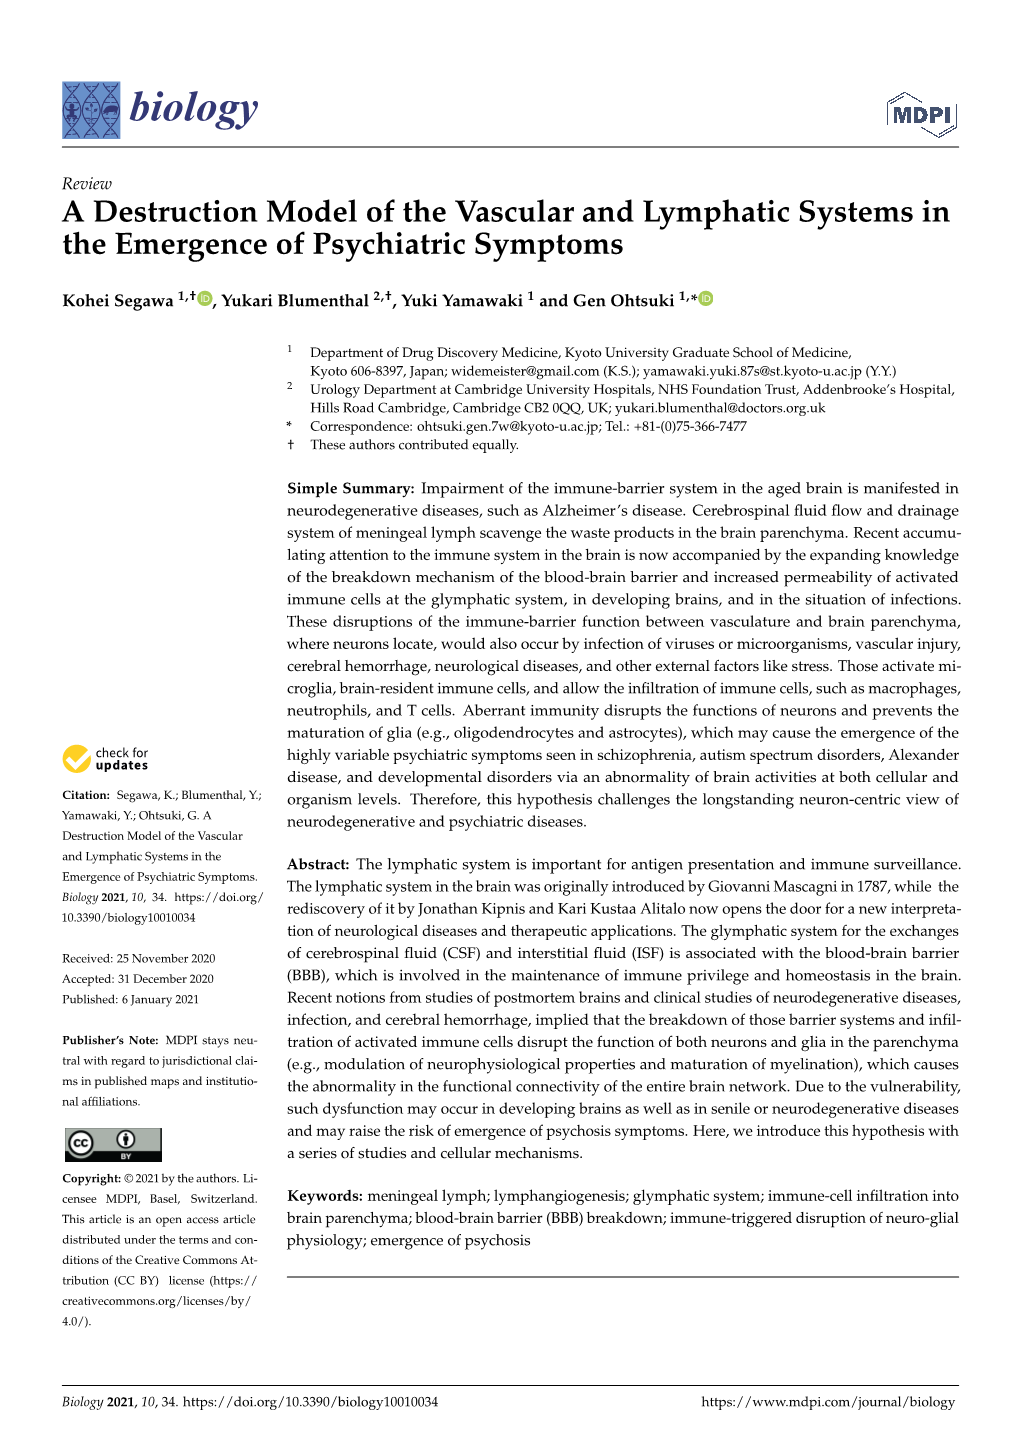 A Destruction Model of the Vascular and Lymphatic Systems in the Emergence of Psychiatric Symptoms